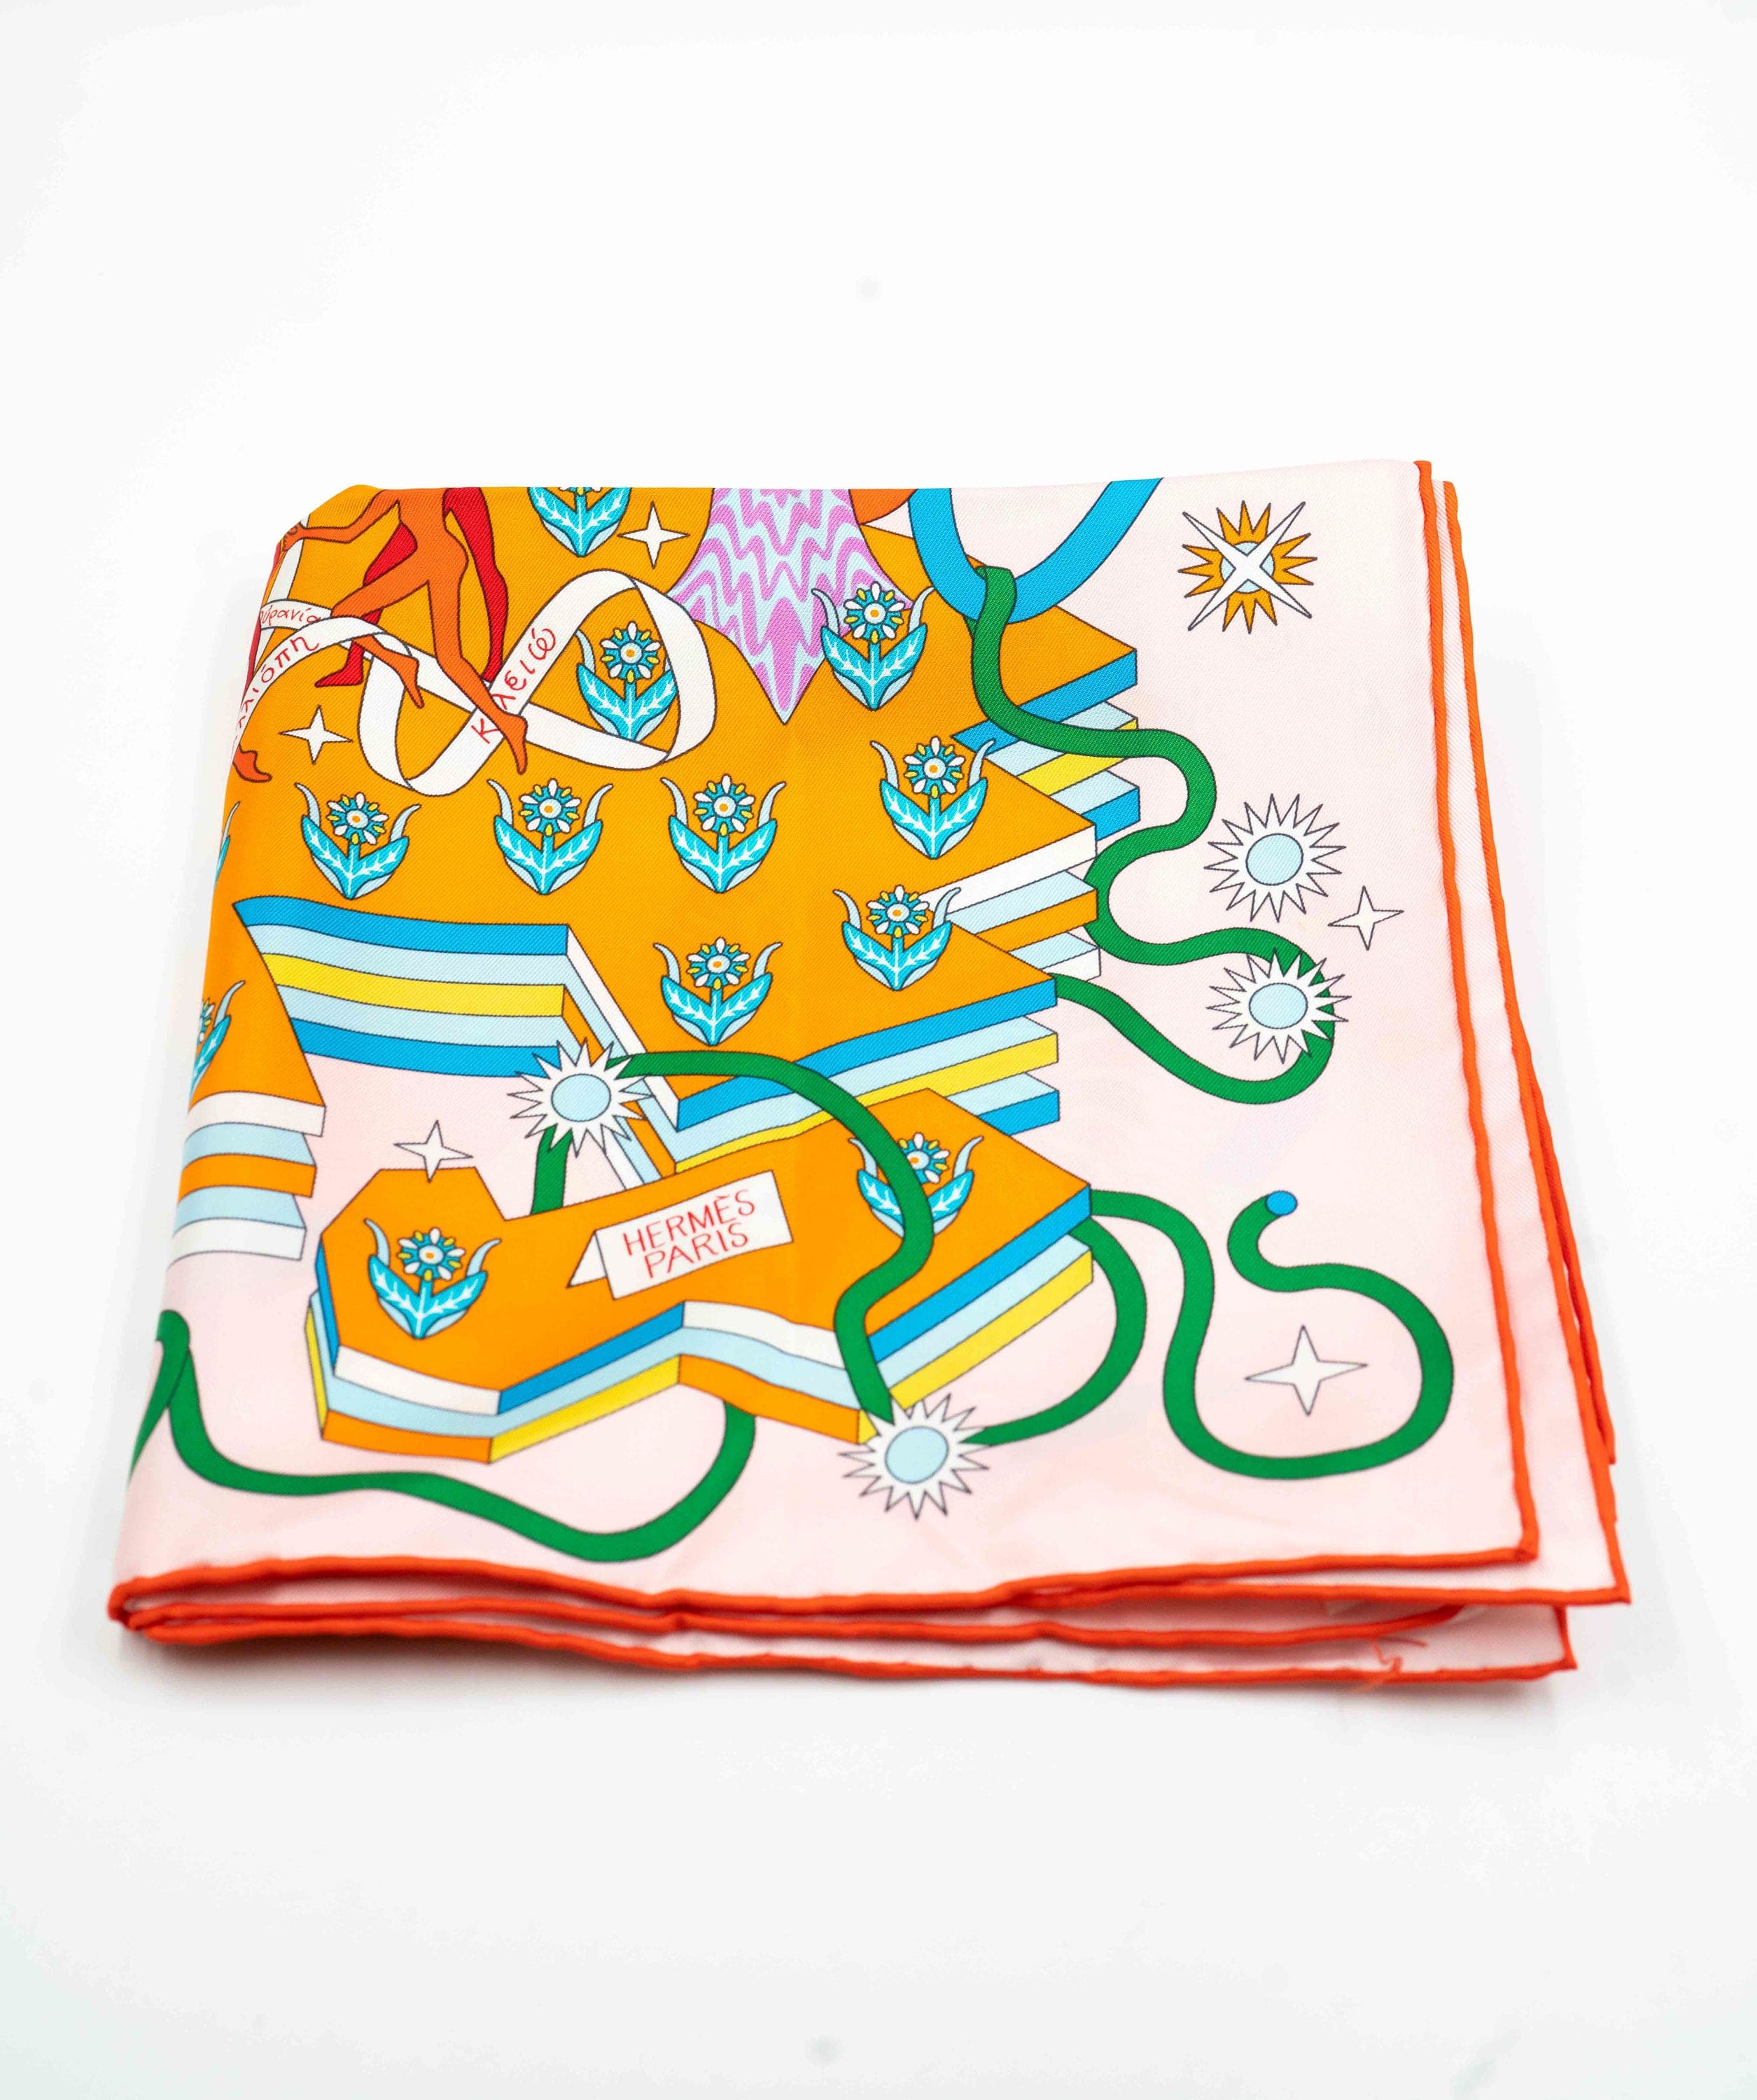 Hermes Silk Scarf Pegase Pop 70 for sale - My Little Hermes Collection